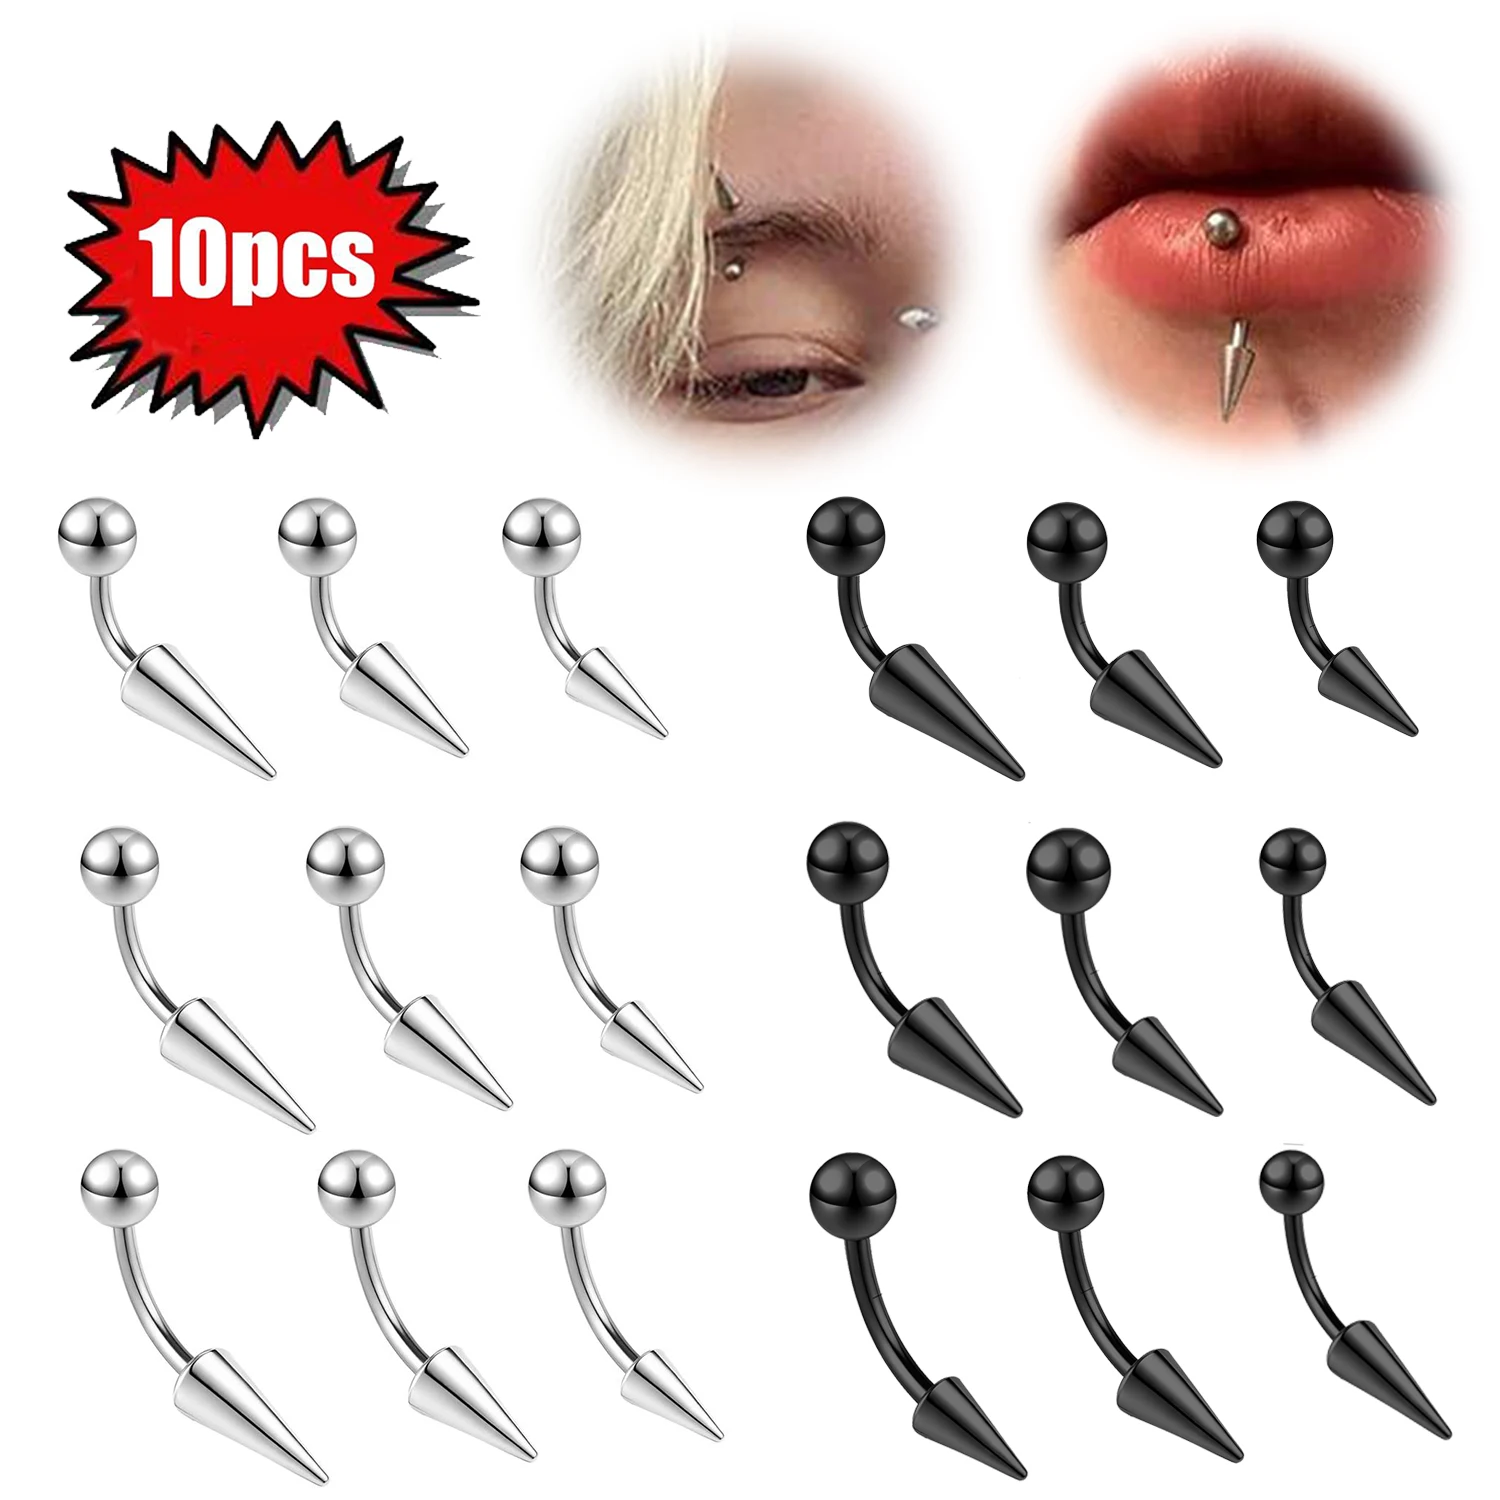 

ZS 10Pcs/lot 16G Spike Curved Barbell Eyebrow Ring Internally Threaded Eyebrow Piercing Cone Helix Earring 6/8/10mm Lip Piercing